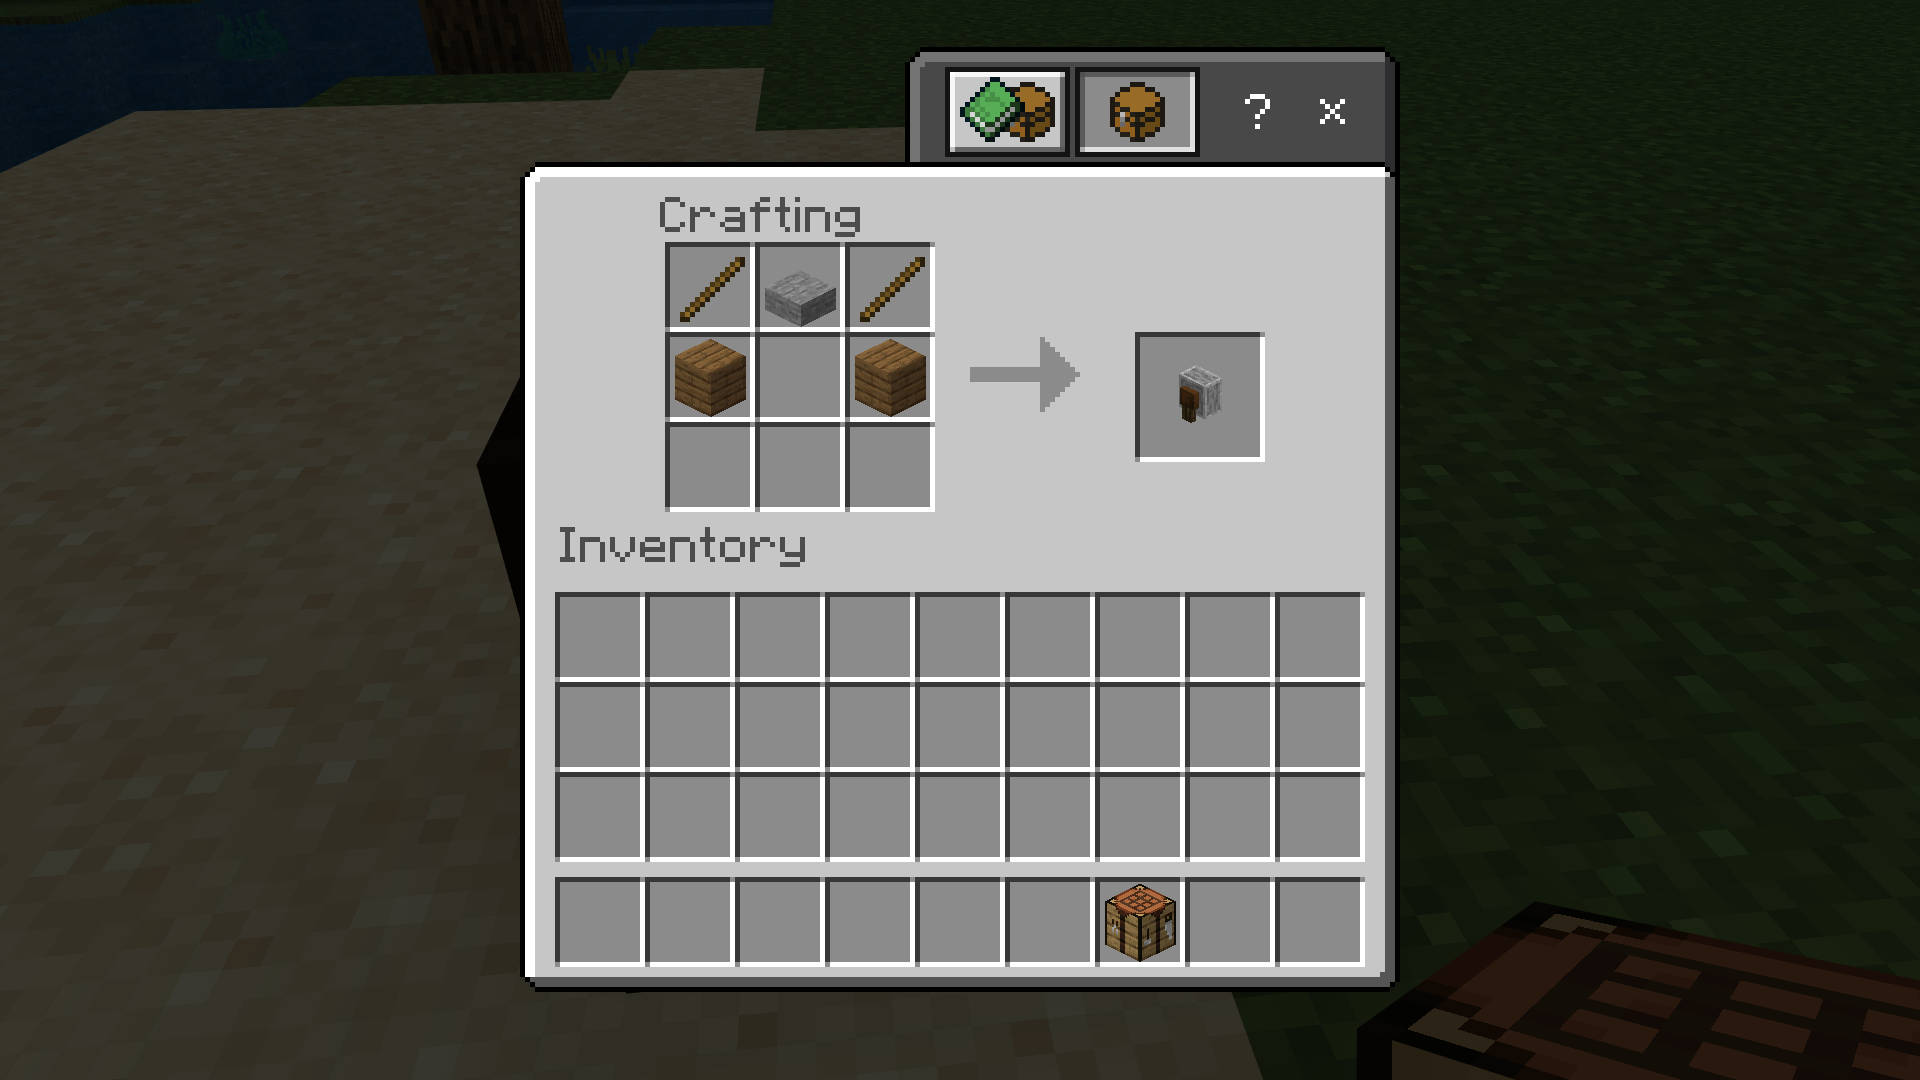 Minecraft Grindstone Recipe: How To Use Minicraft Grindstone